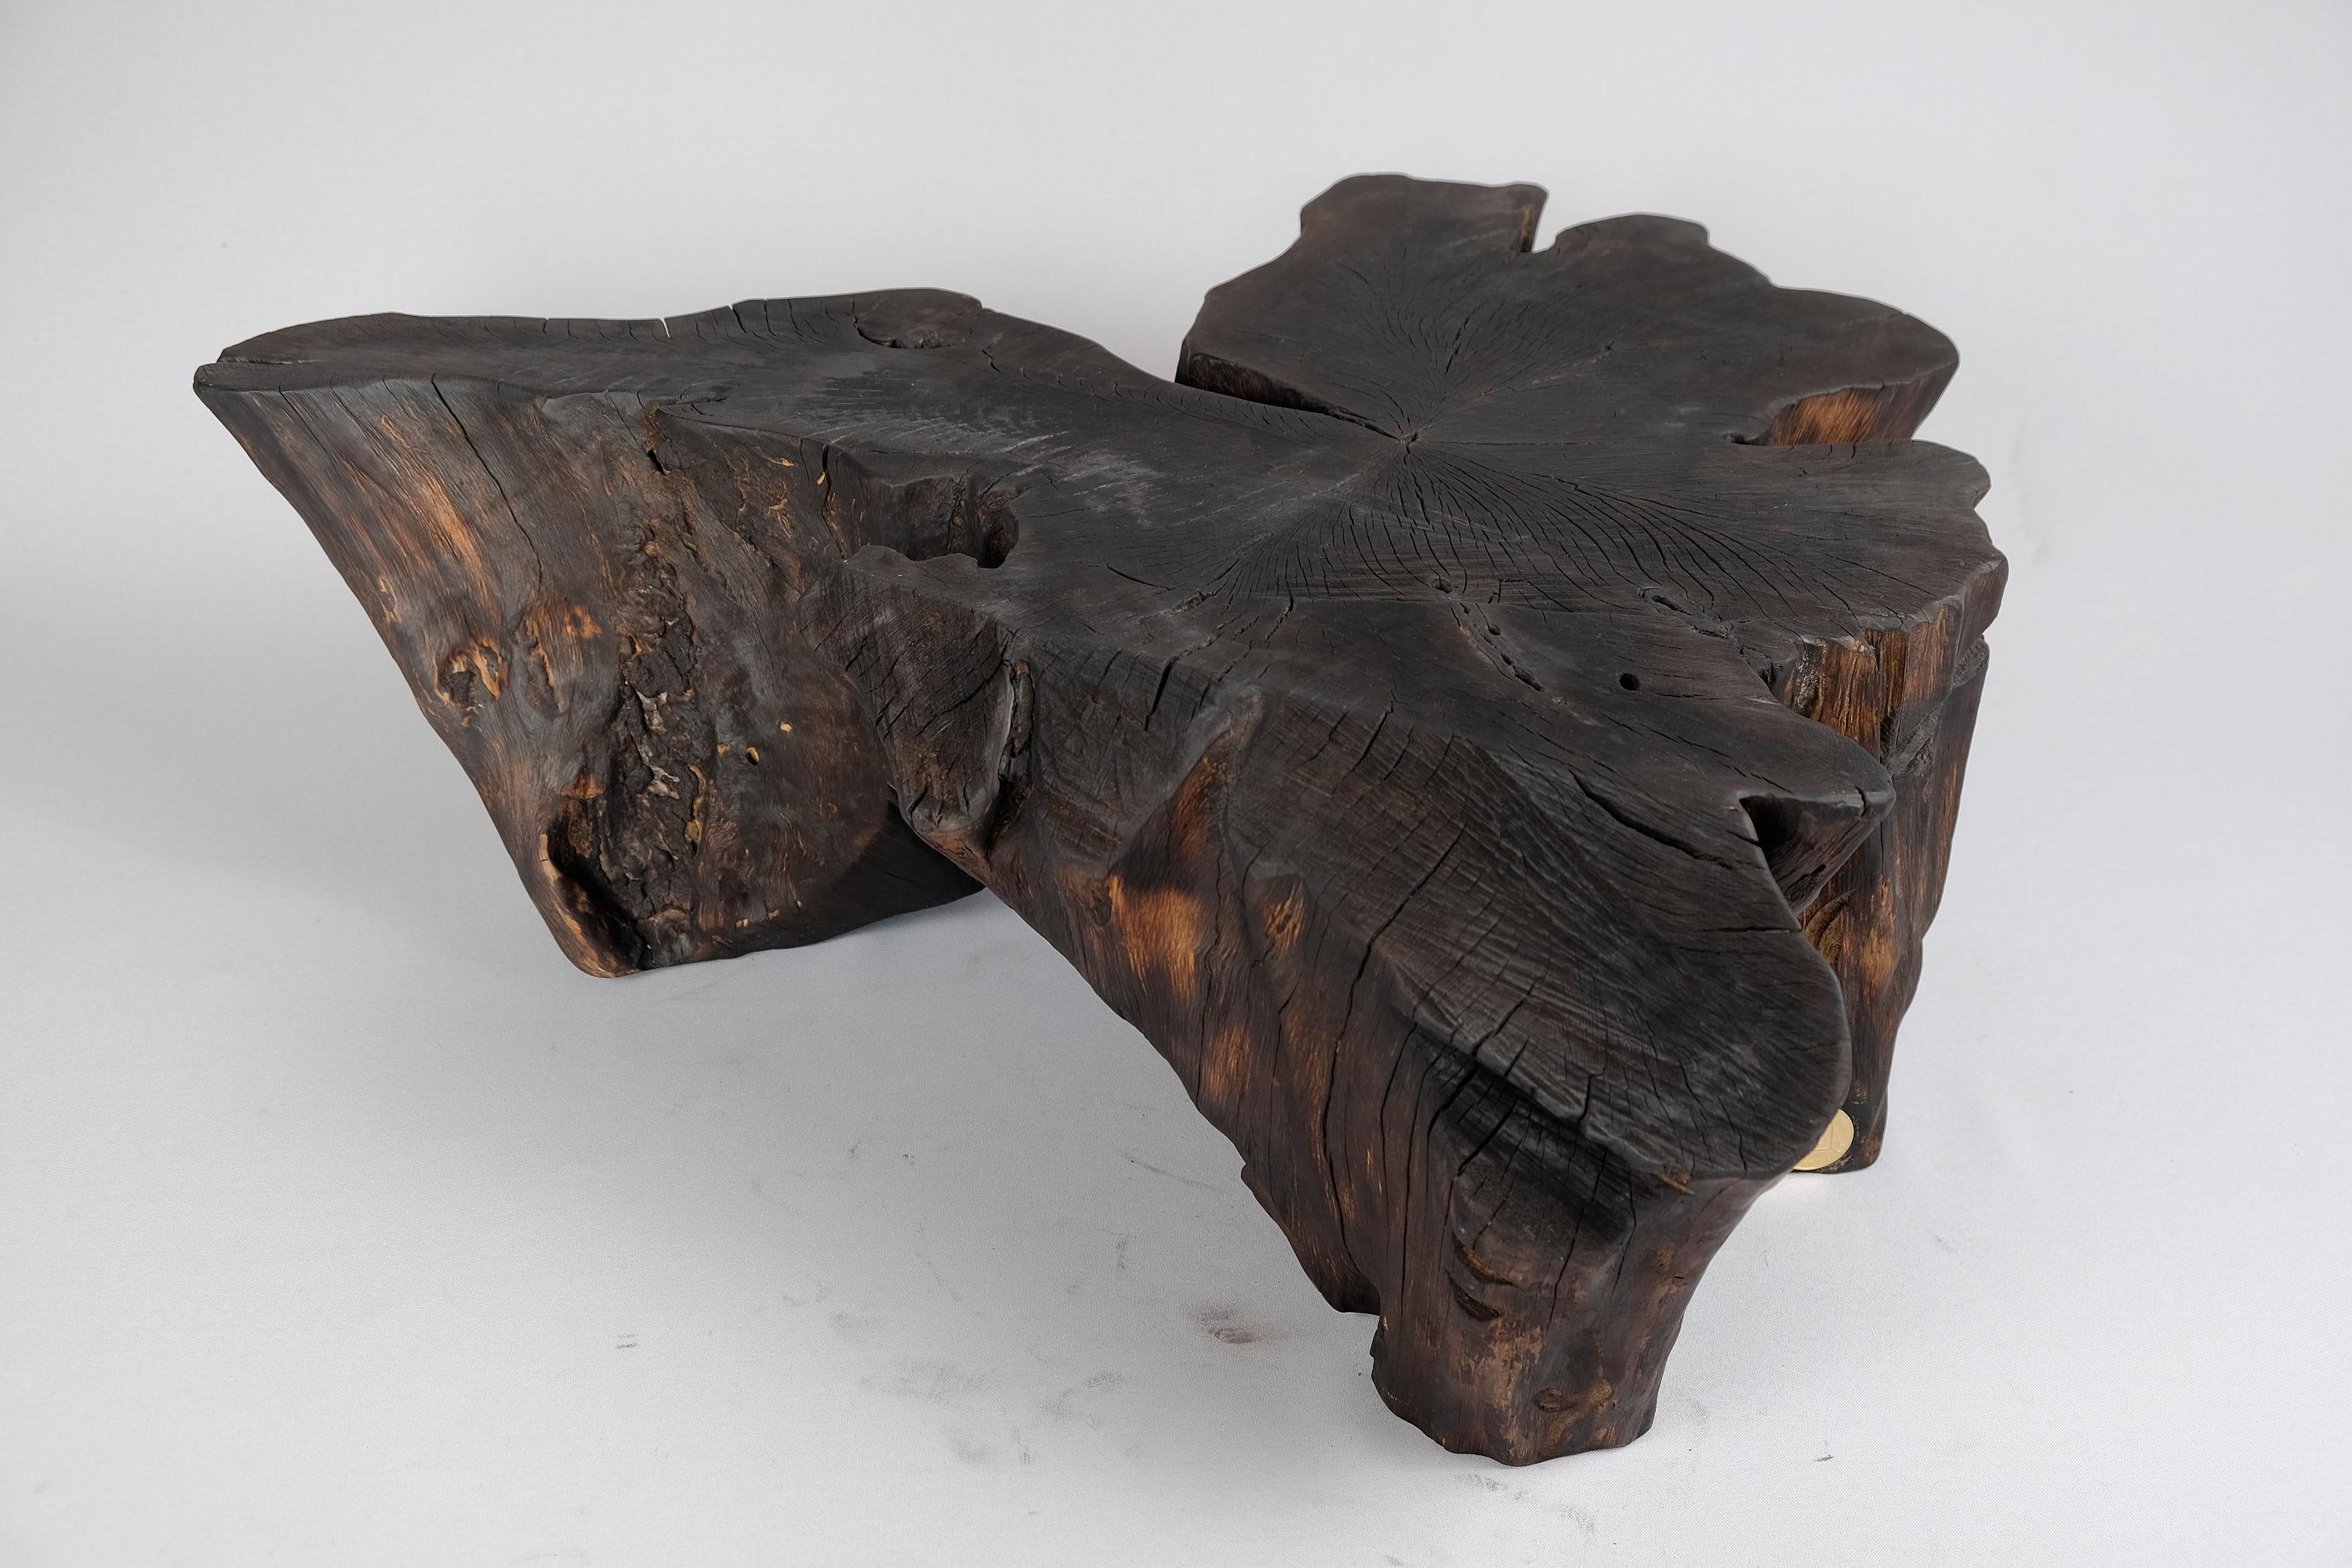 Chainsaw carved coffee table in organic shape. Carved from a single piece of burnt wood and protected with the highest quality oils, ensuring durability for generations. Such unique handmade design will highlight your interior and bring comfort to